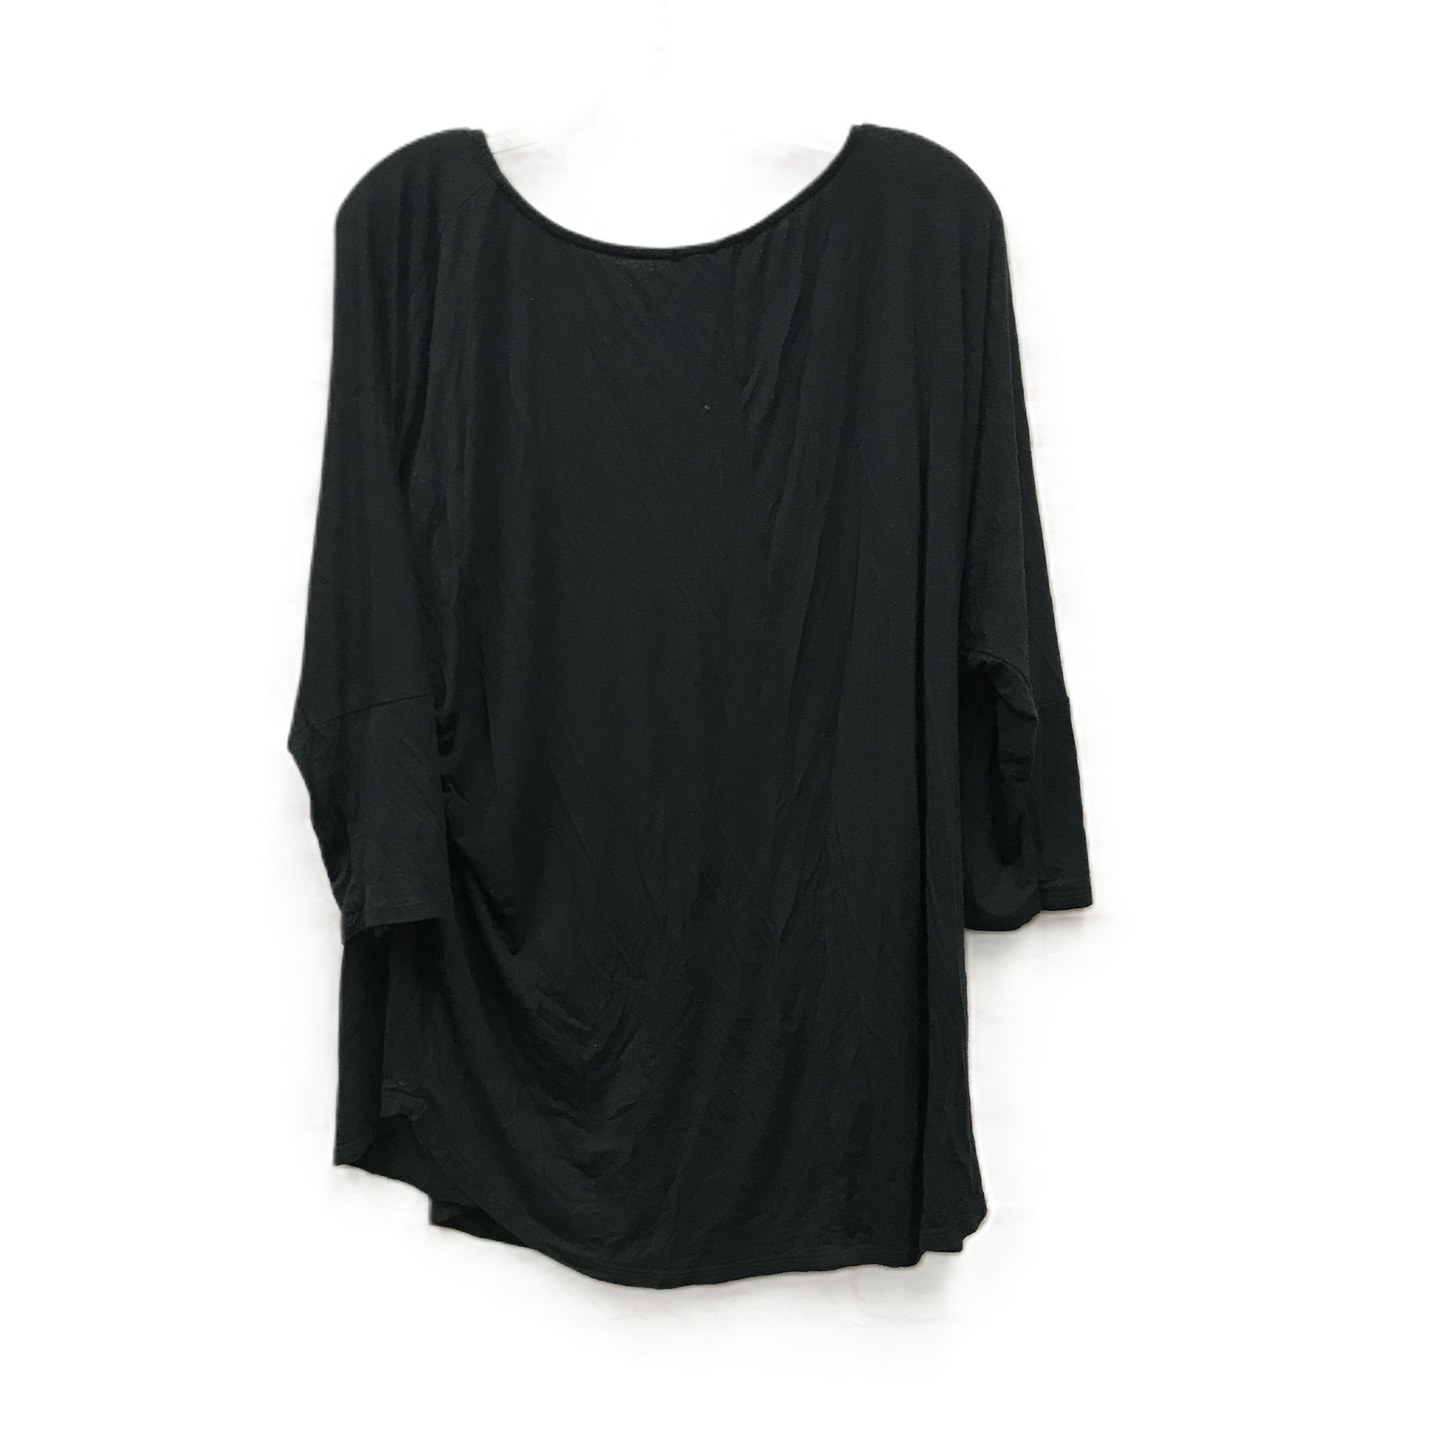 Black Top Short Sleeve By Cme, Size: 2x